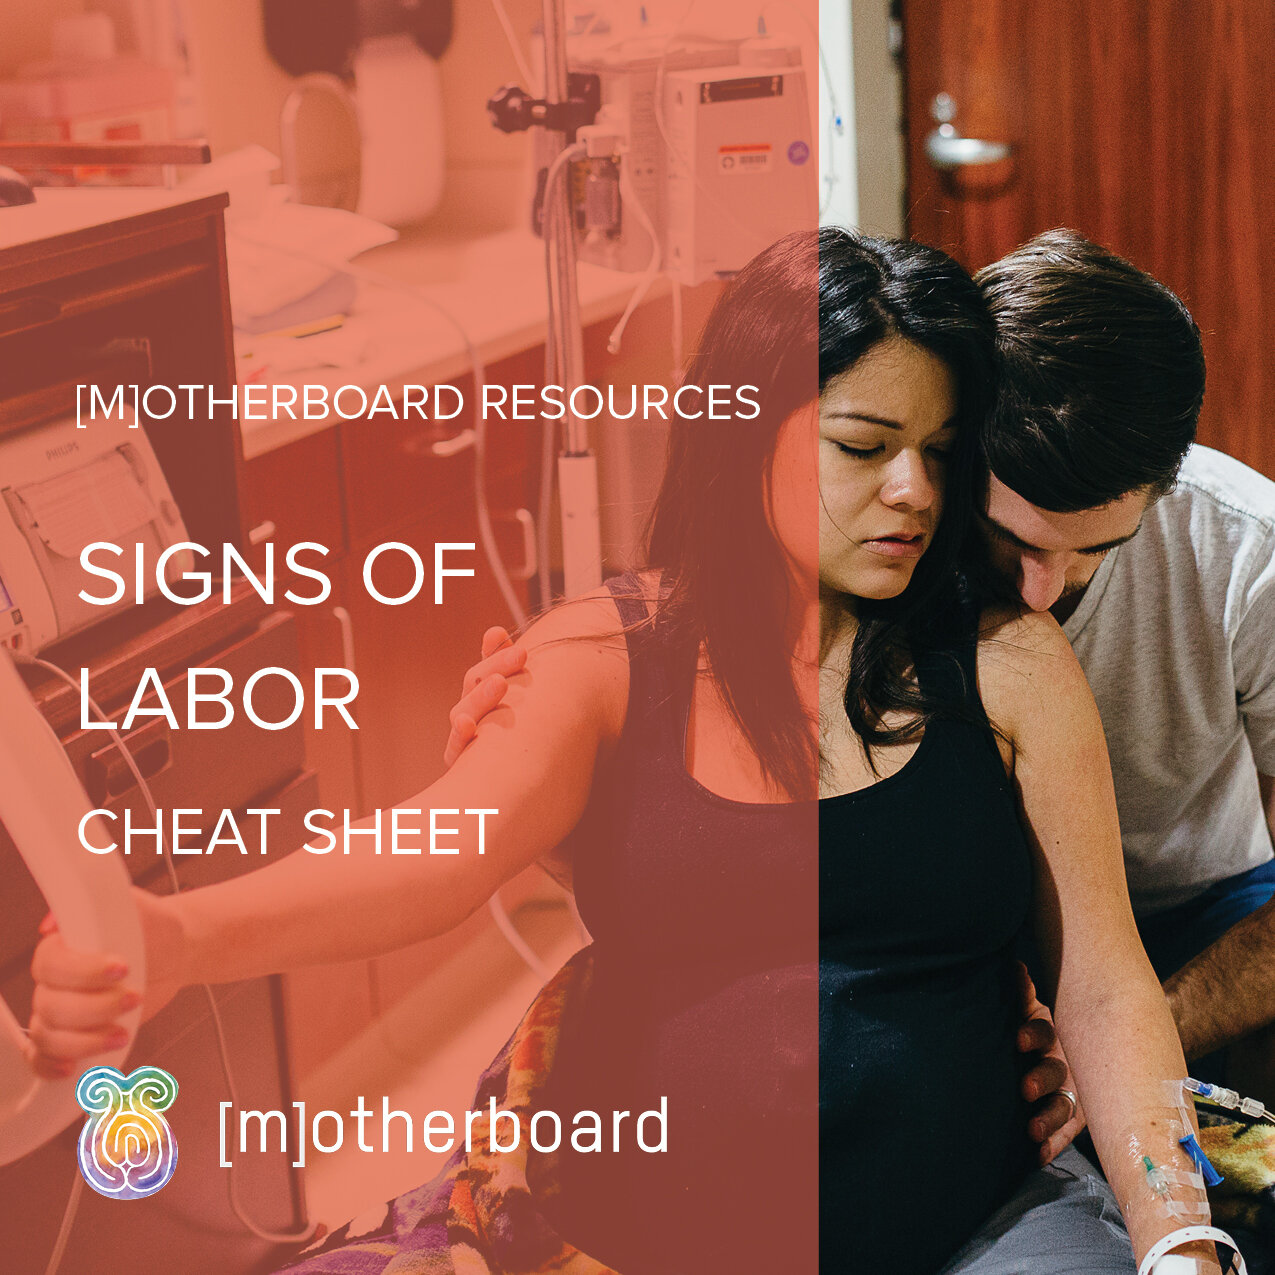 Copy of SIGNS OF LABOR CHEAT SHEET